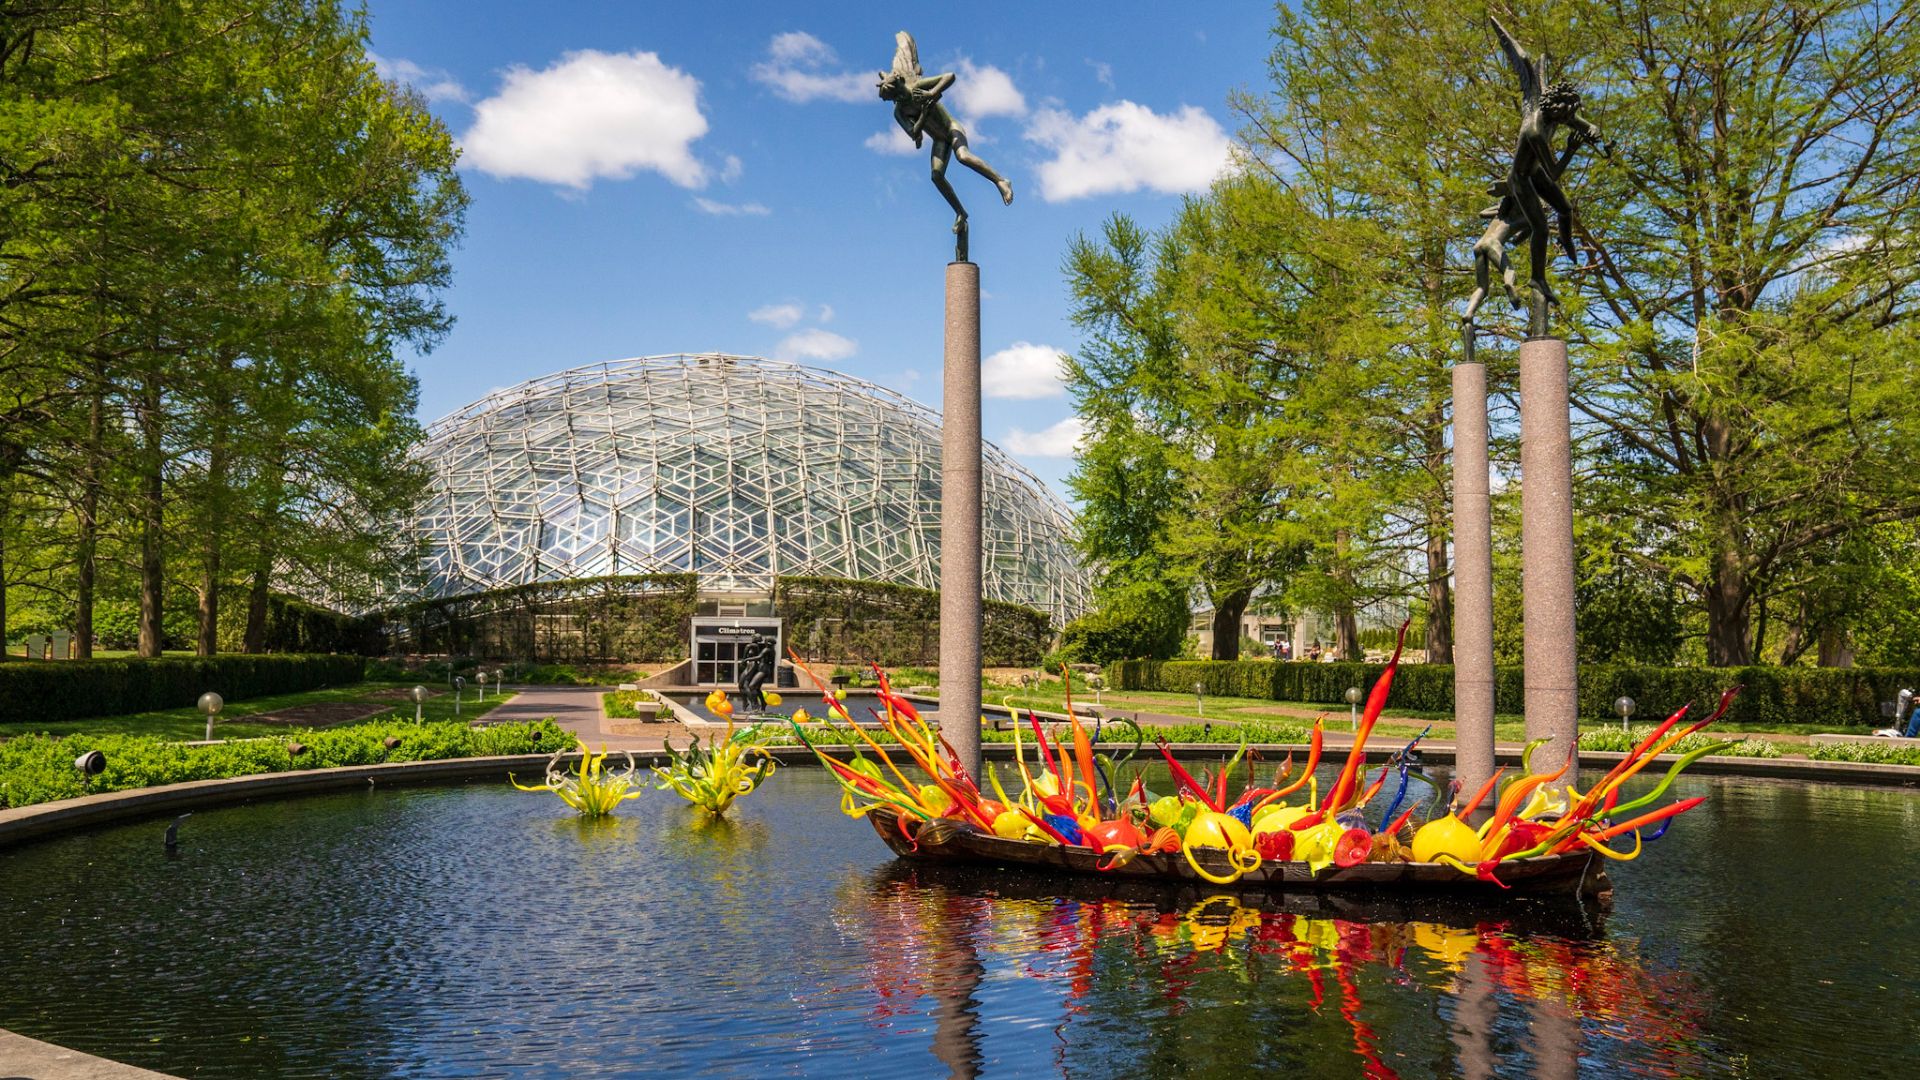 A boat of organic glass shapes sits in front of the Climatron at the Missouri Botanical Garden during Chihuly in the Garden 2023.